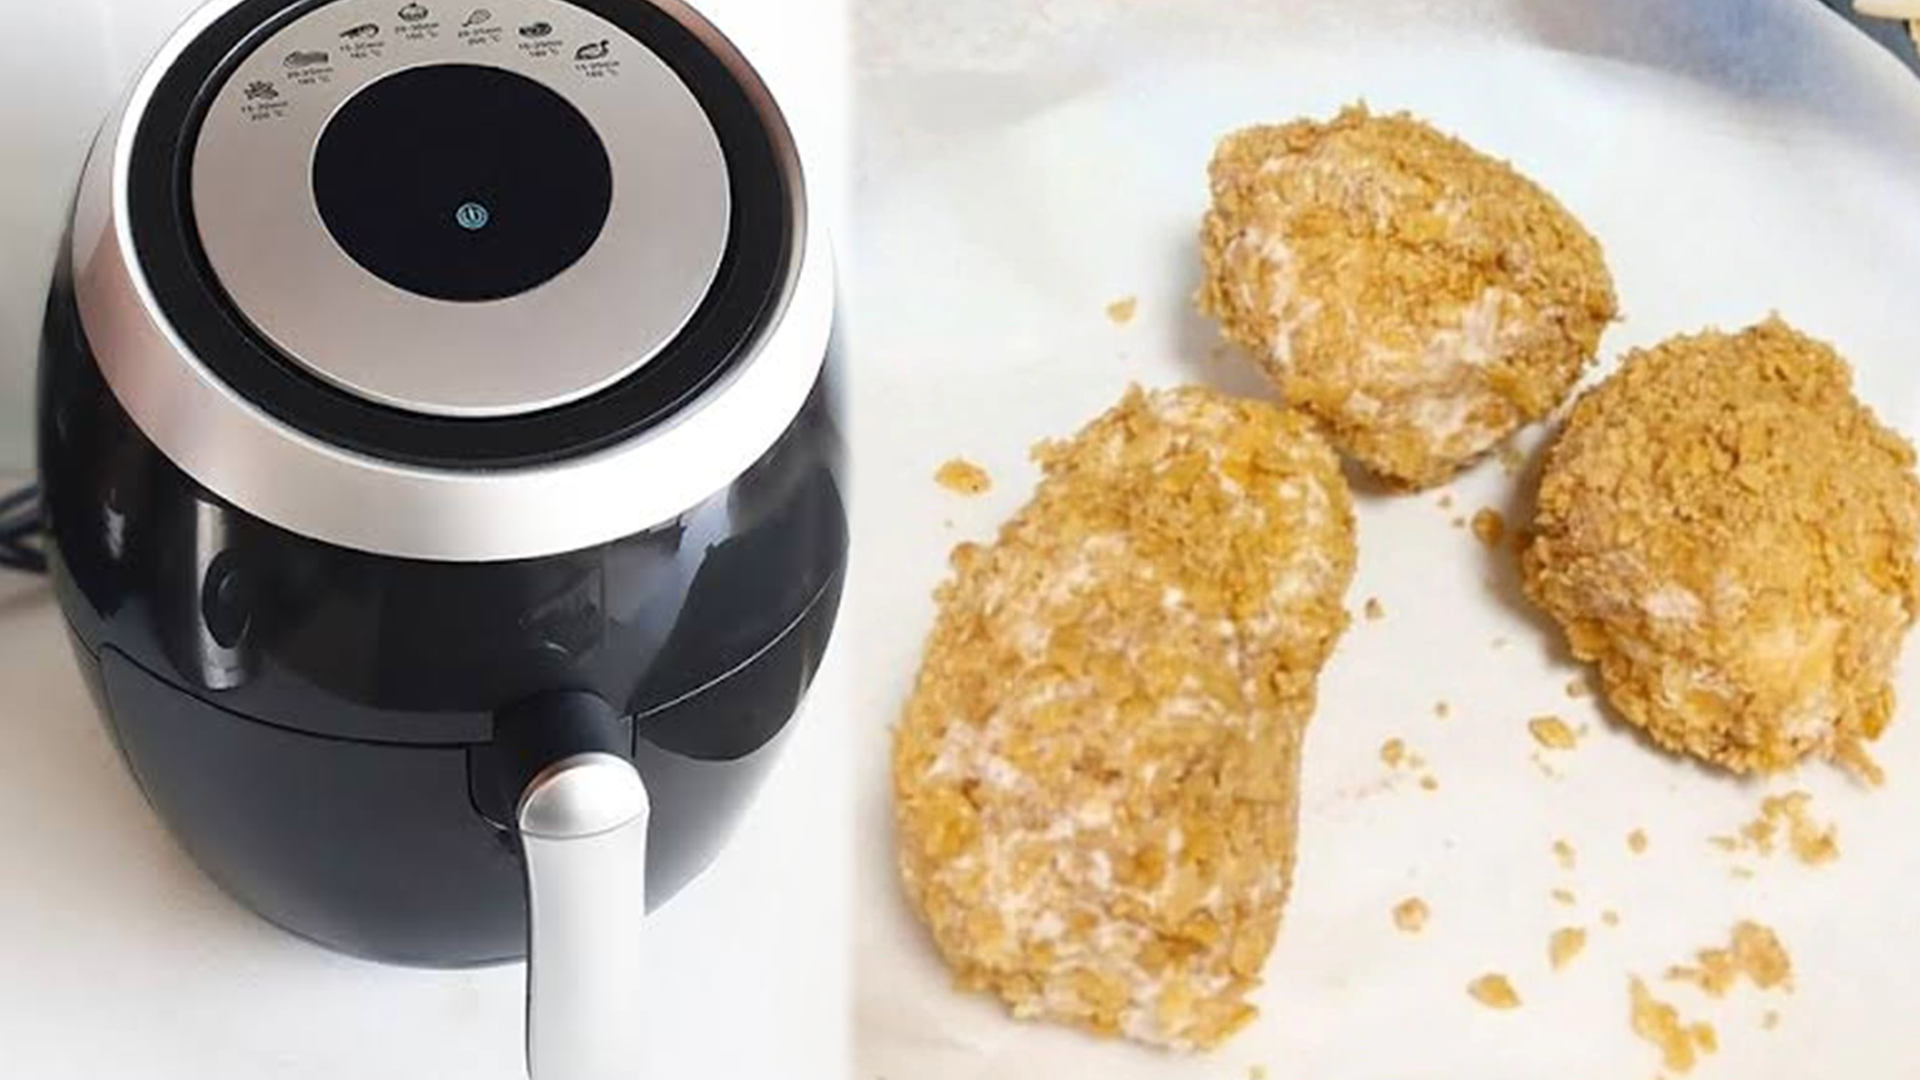 Kmart Fans Air Fryer Recipe For Fried Ice Cream Is Cheap ...